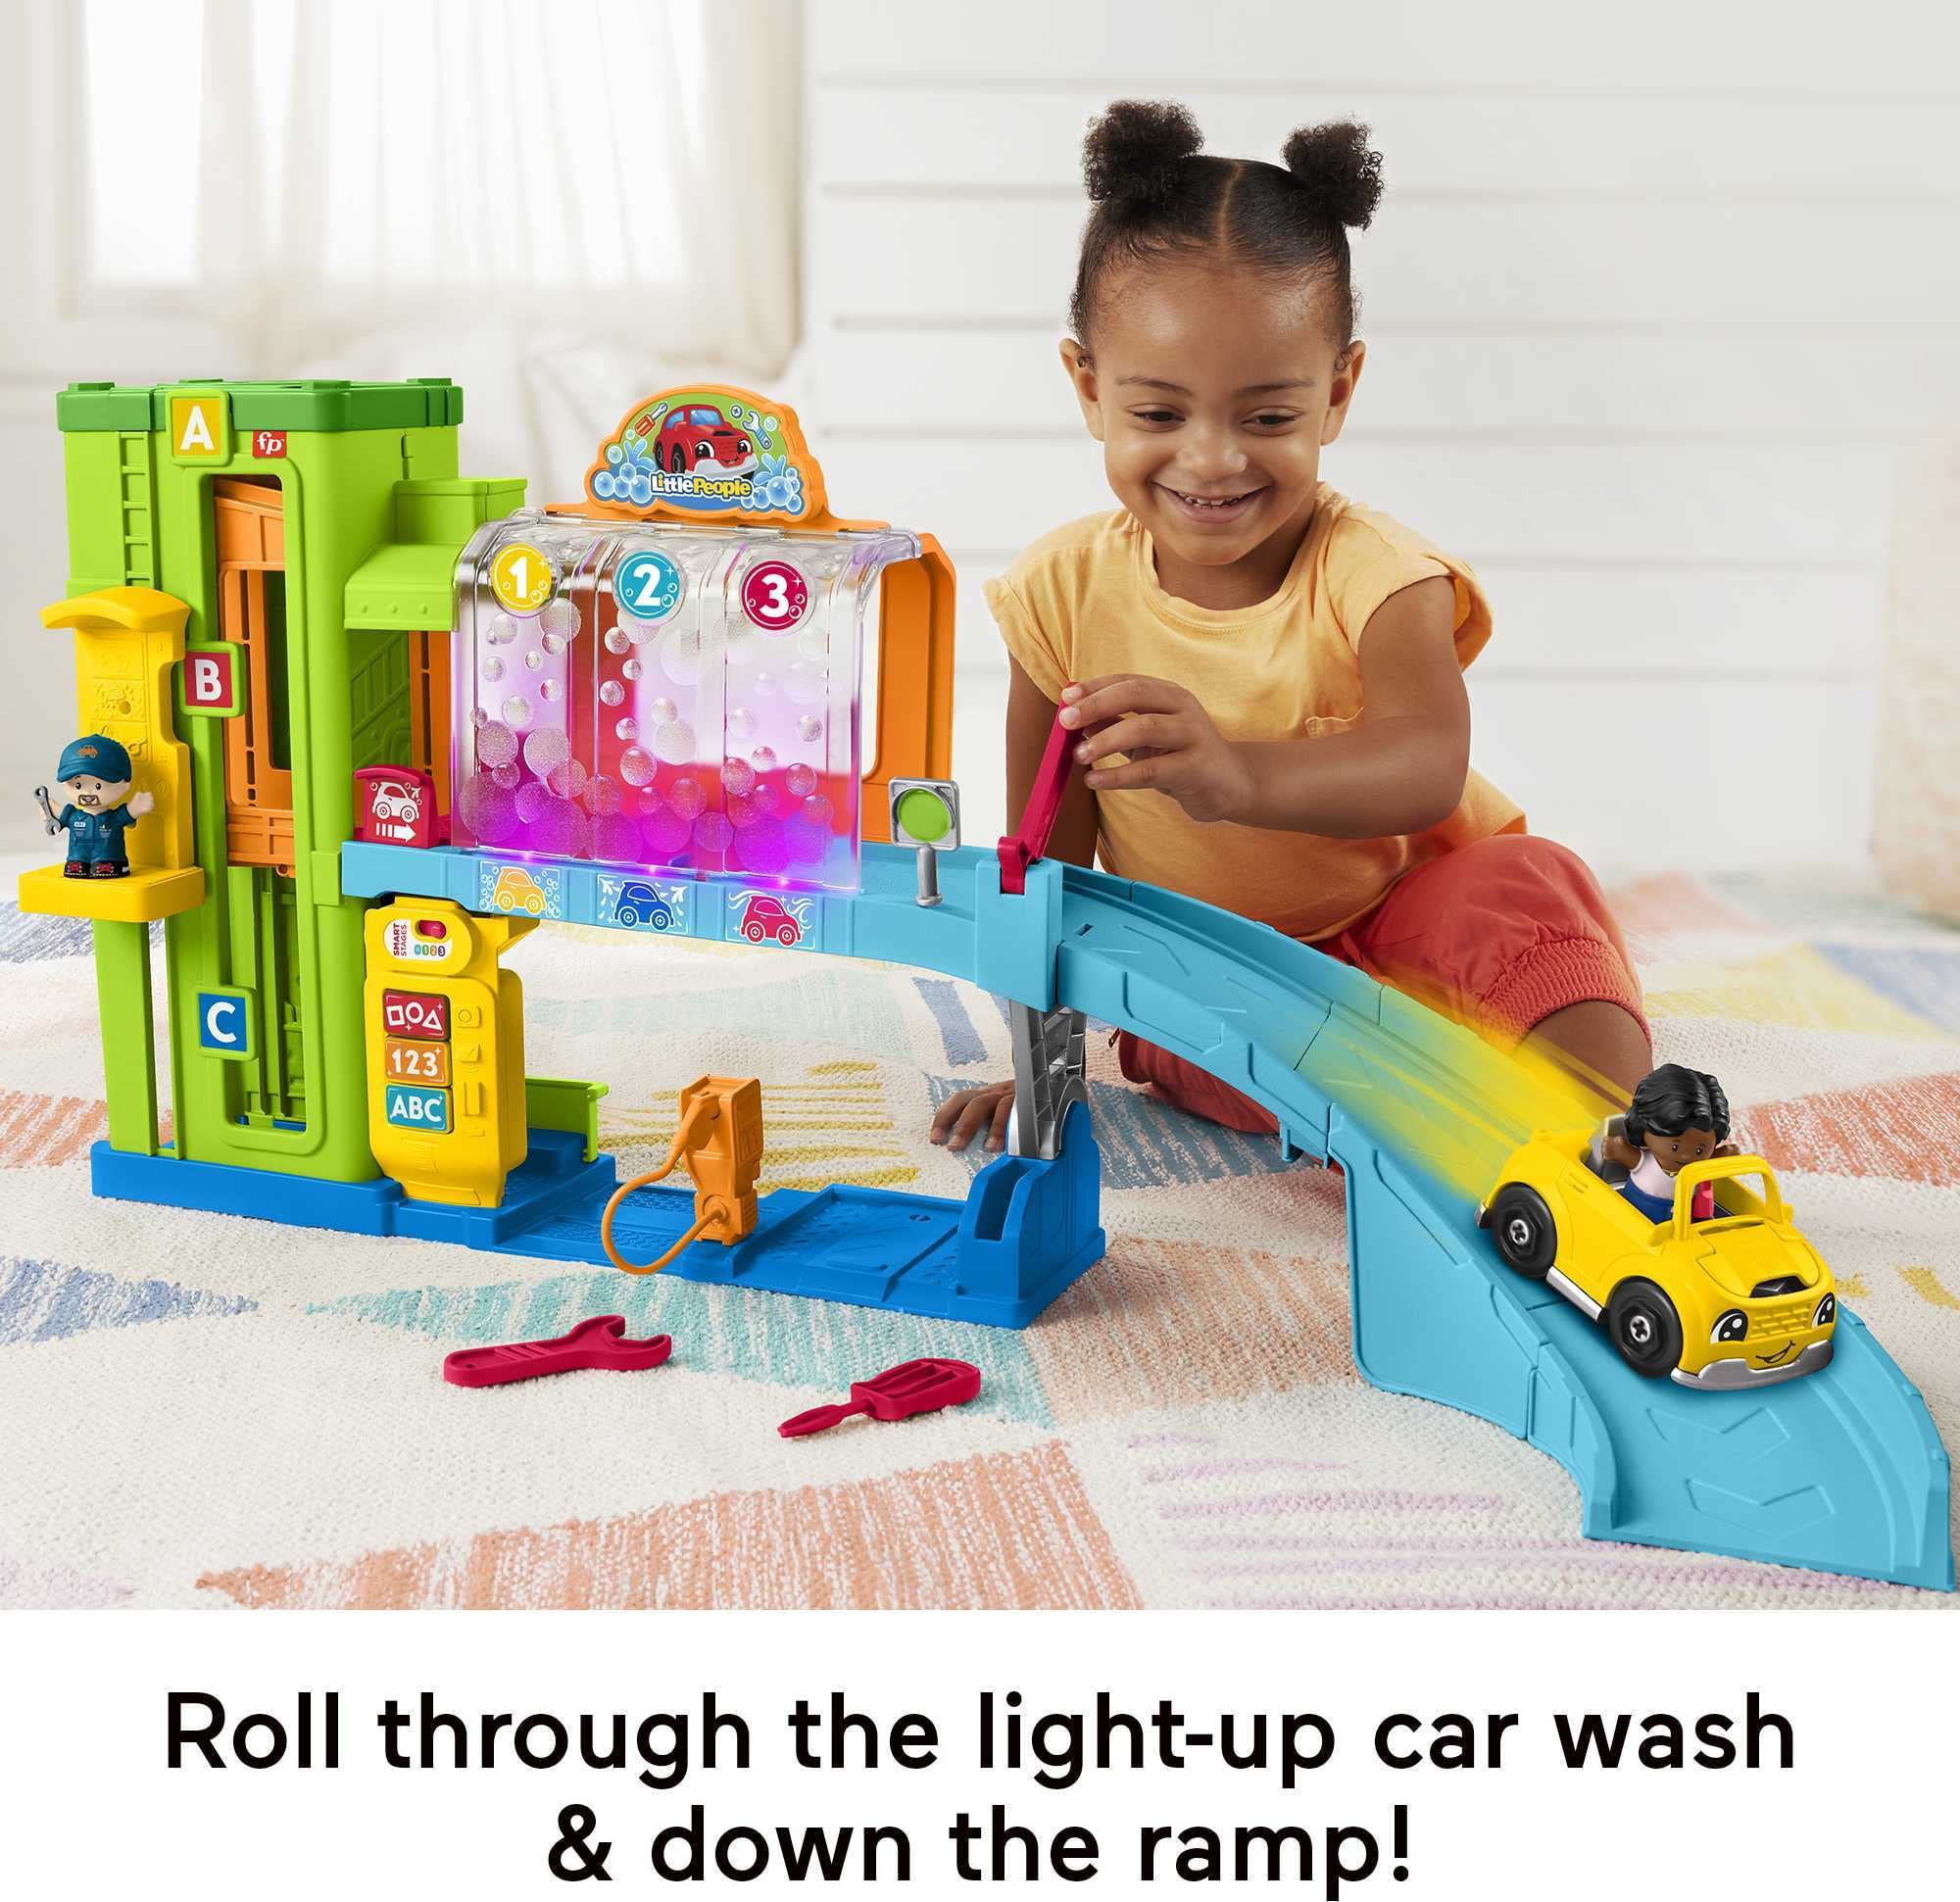 Fisher-Price Little People Toddler Playset Light-Up Learning Garage with Smart Stages Plus Toy Car and Ramp for Ages 1+ Years